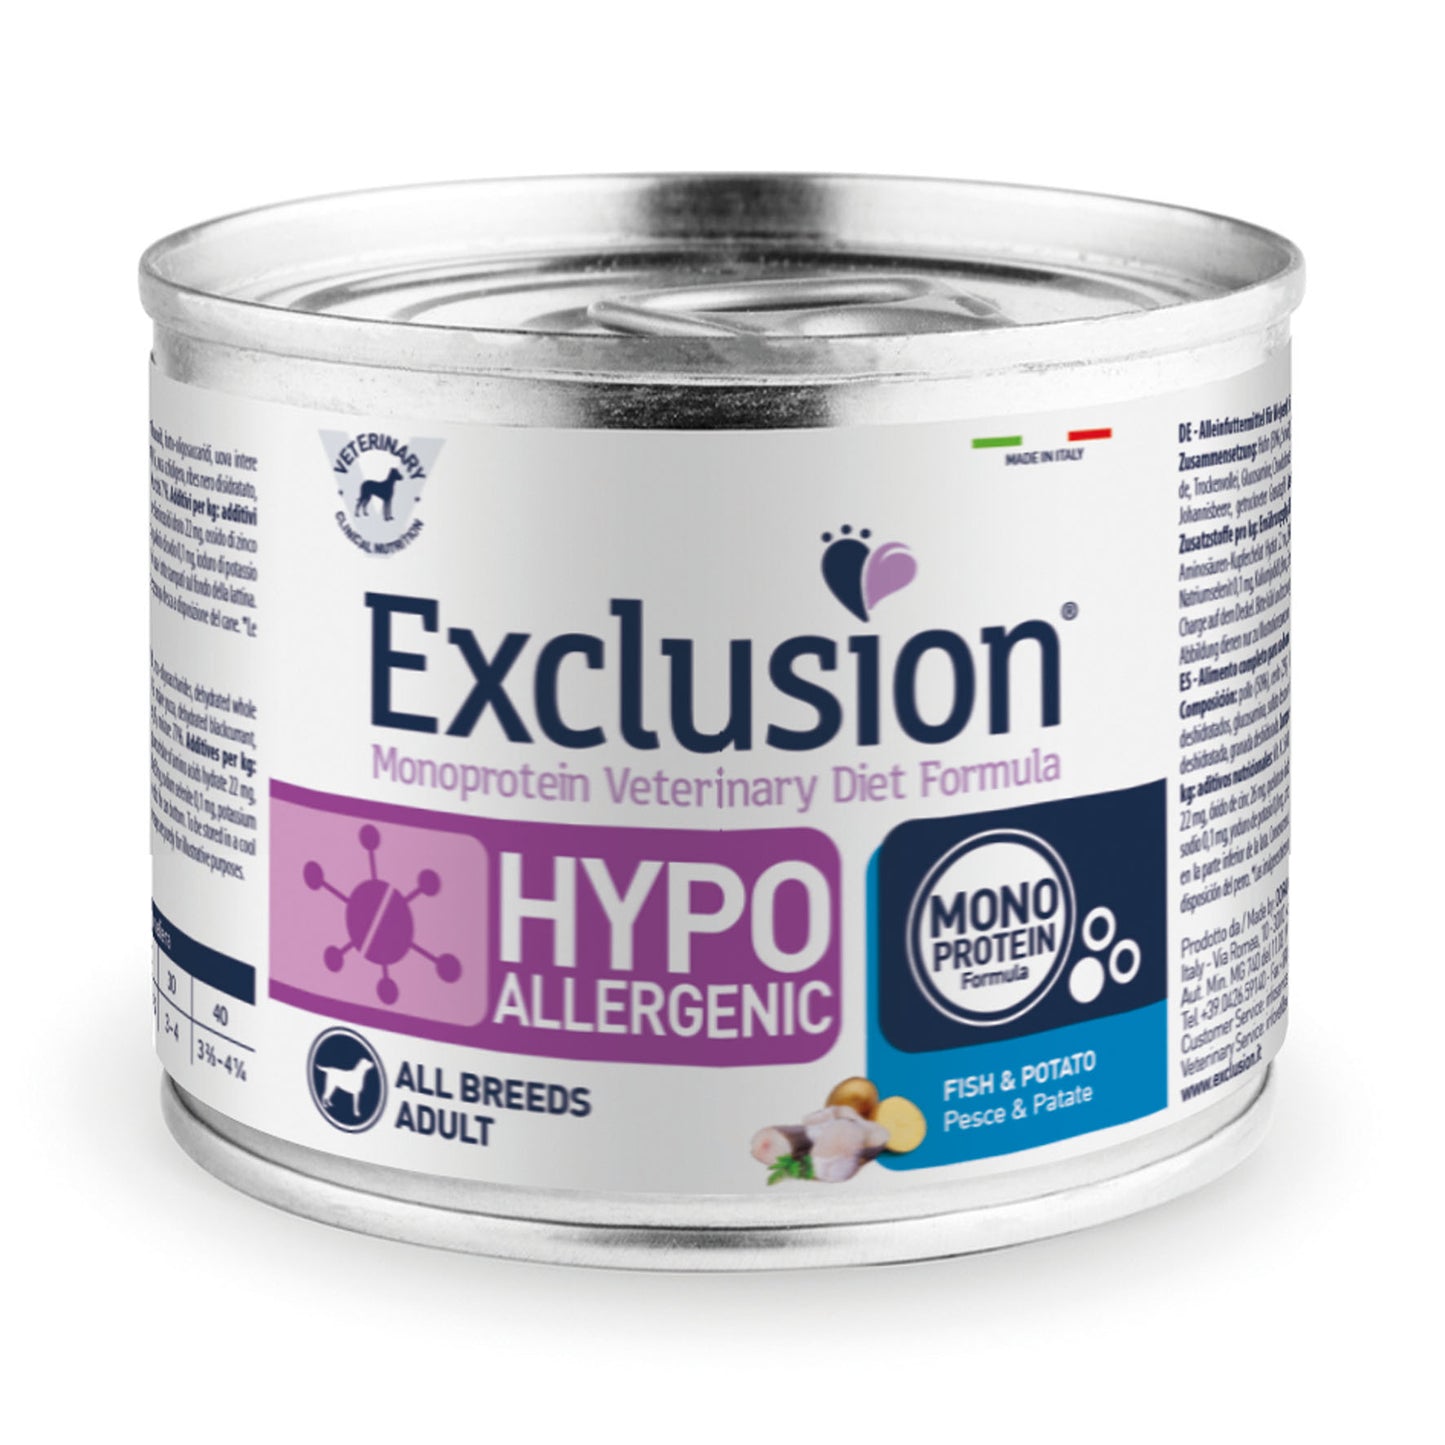 Exclusion Dog VET - HYPOALLERGENIC -Adult All Breeds Fish